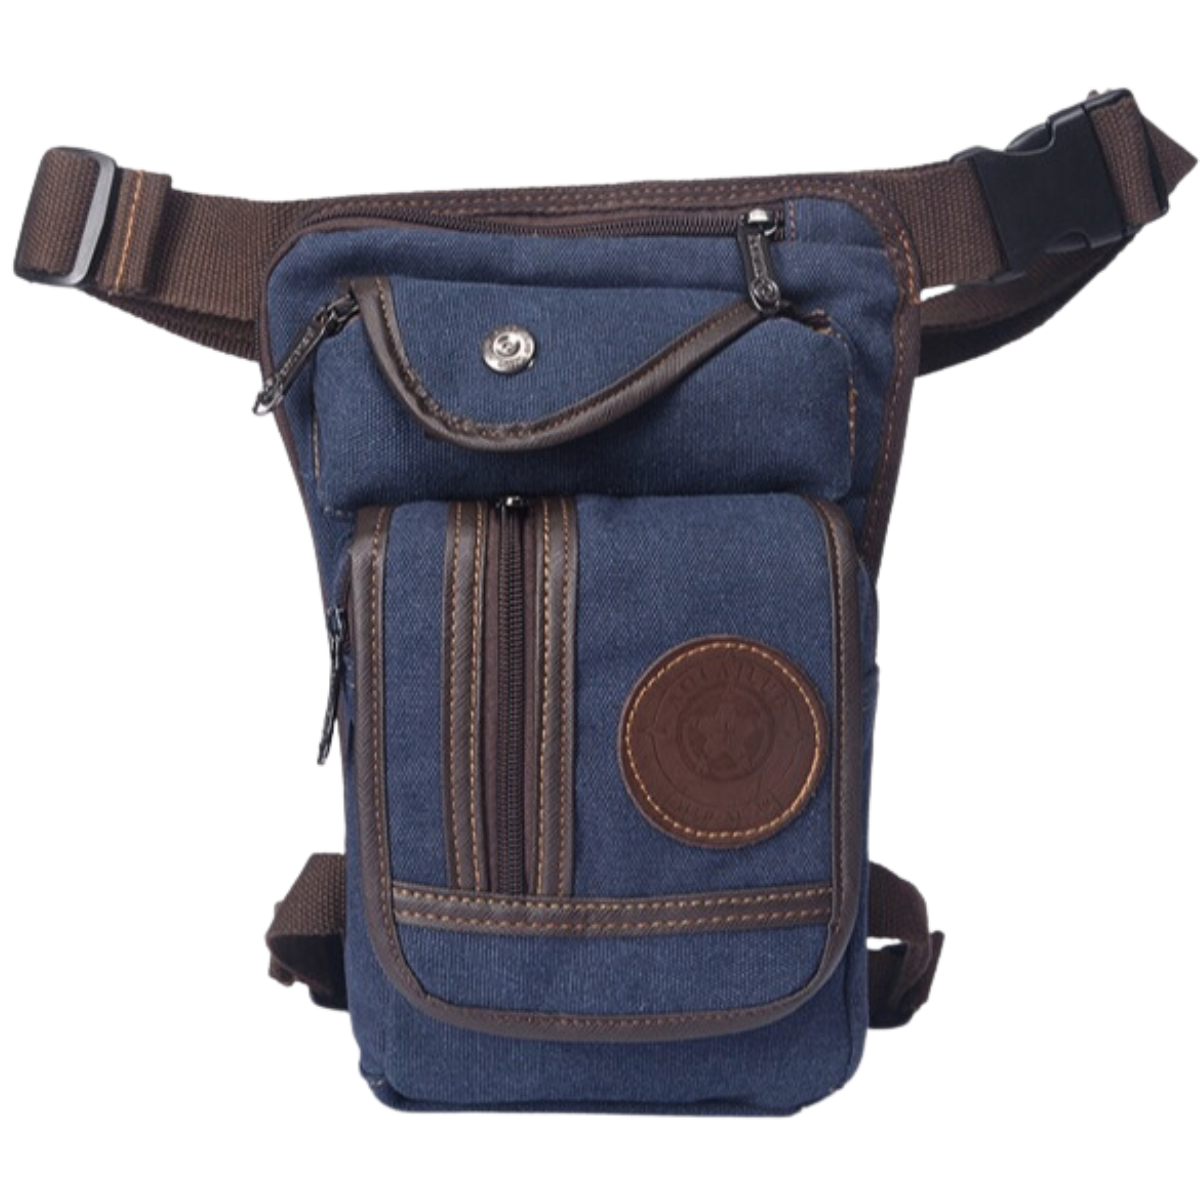 A Badass Motorcycle Leg Bag for bikers with a blue color and brown zipper to organize important items.